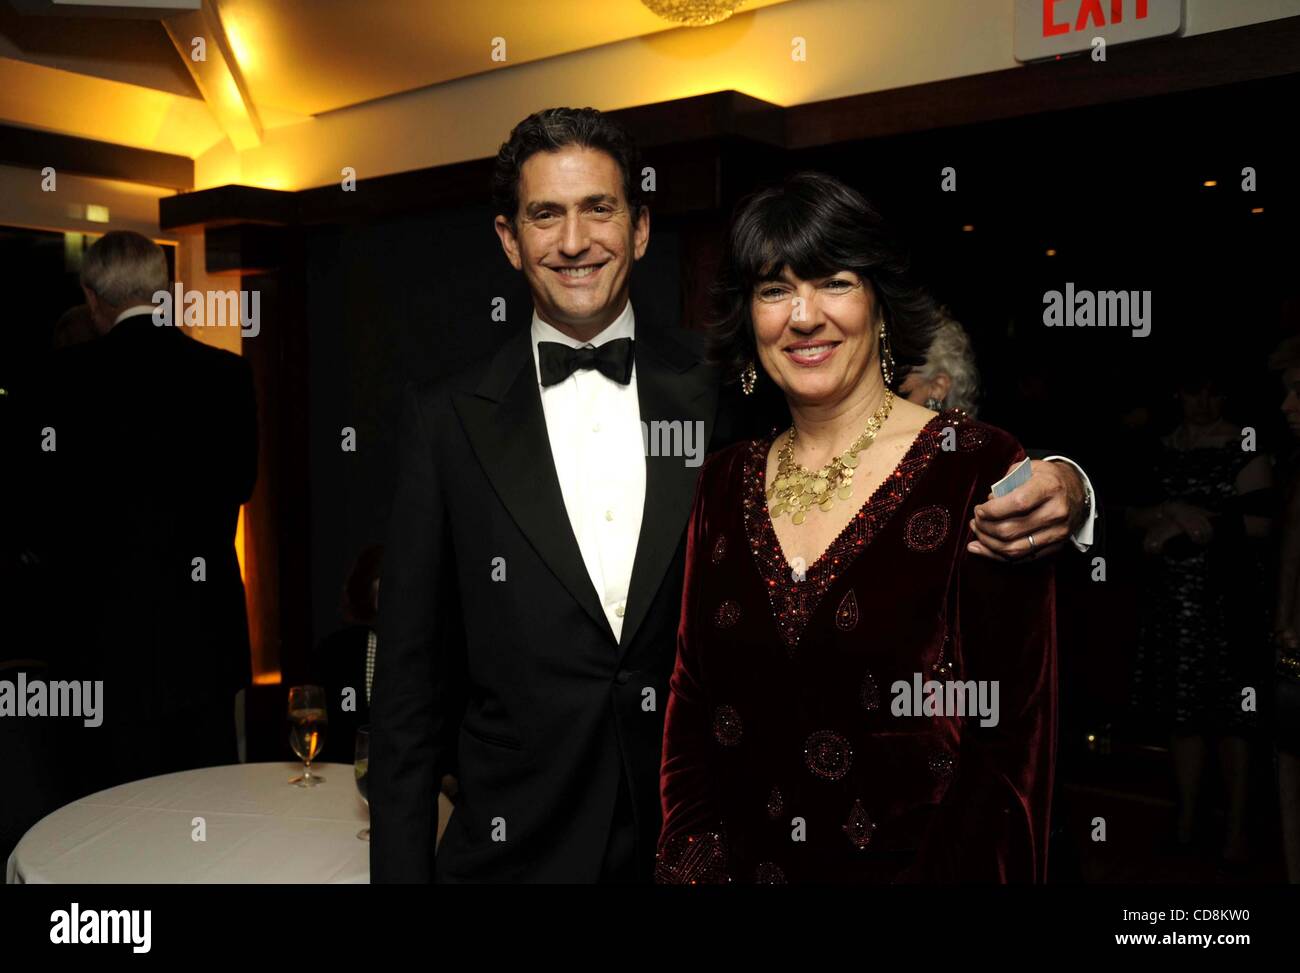 Nov. 21, 2008 - Washington, District of Columbia, U.S. - 11/21/08 The National Press Club-Washington DC..Christiane Amanpour of CNN receives the 4th Estate Award from the NPC.It  is the highest honor given by the club  to a journalist. Amanpour to pose with her husband, James Rubin .   -   2008..I13 Stock Photo